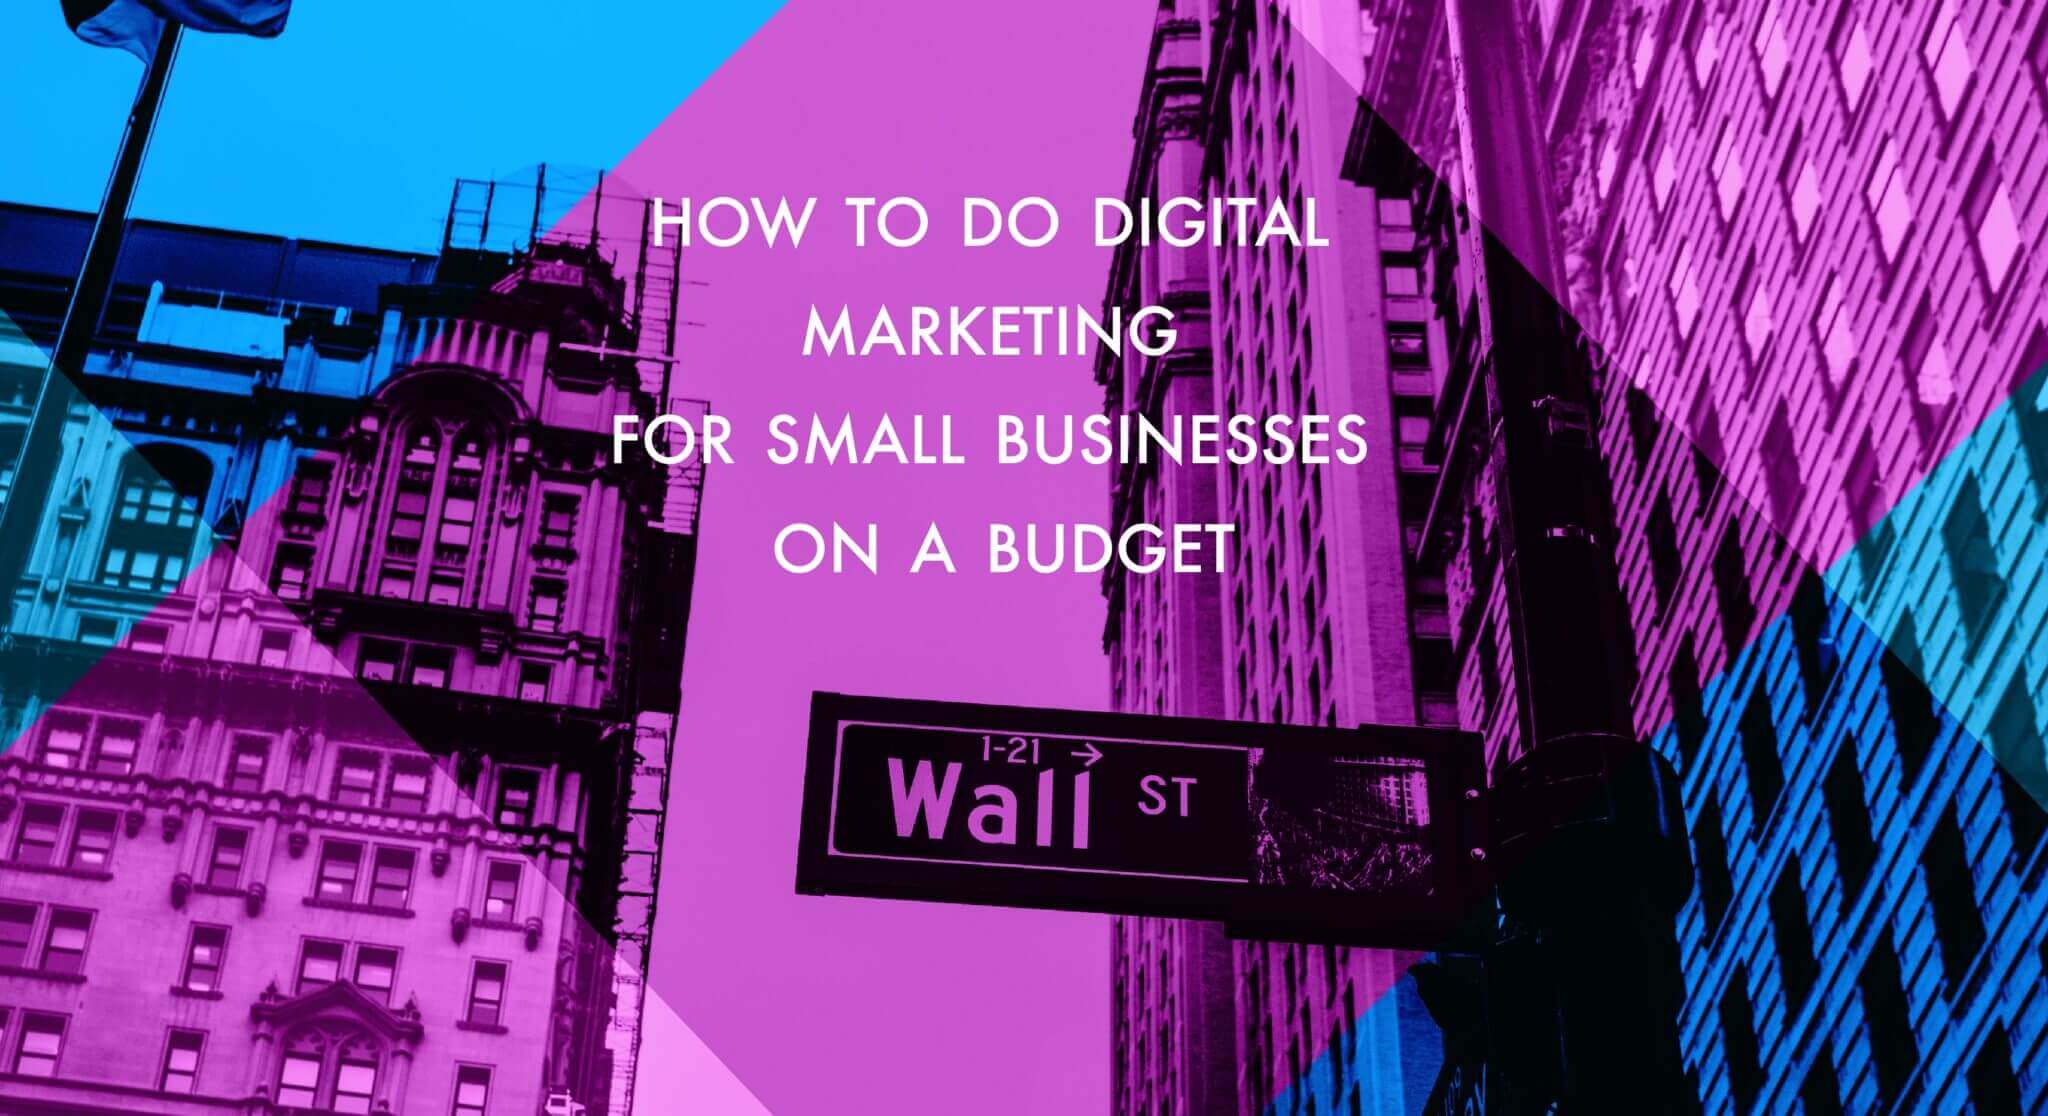 How To Do Digital Marketing for Small Businesses on a Tight Budget